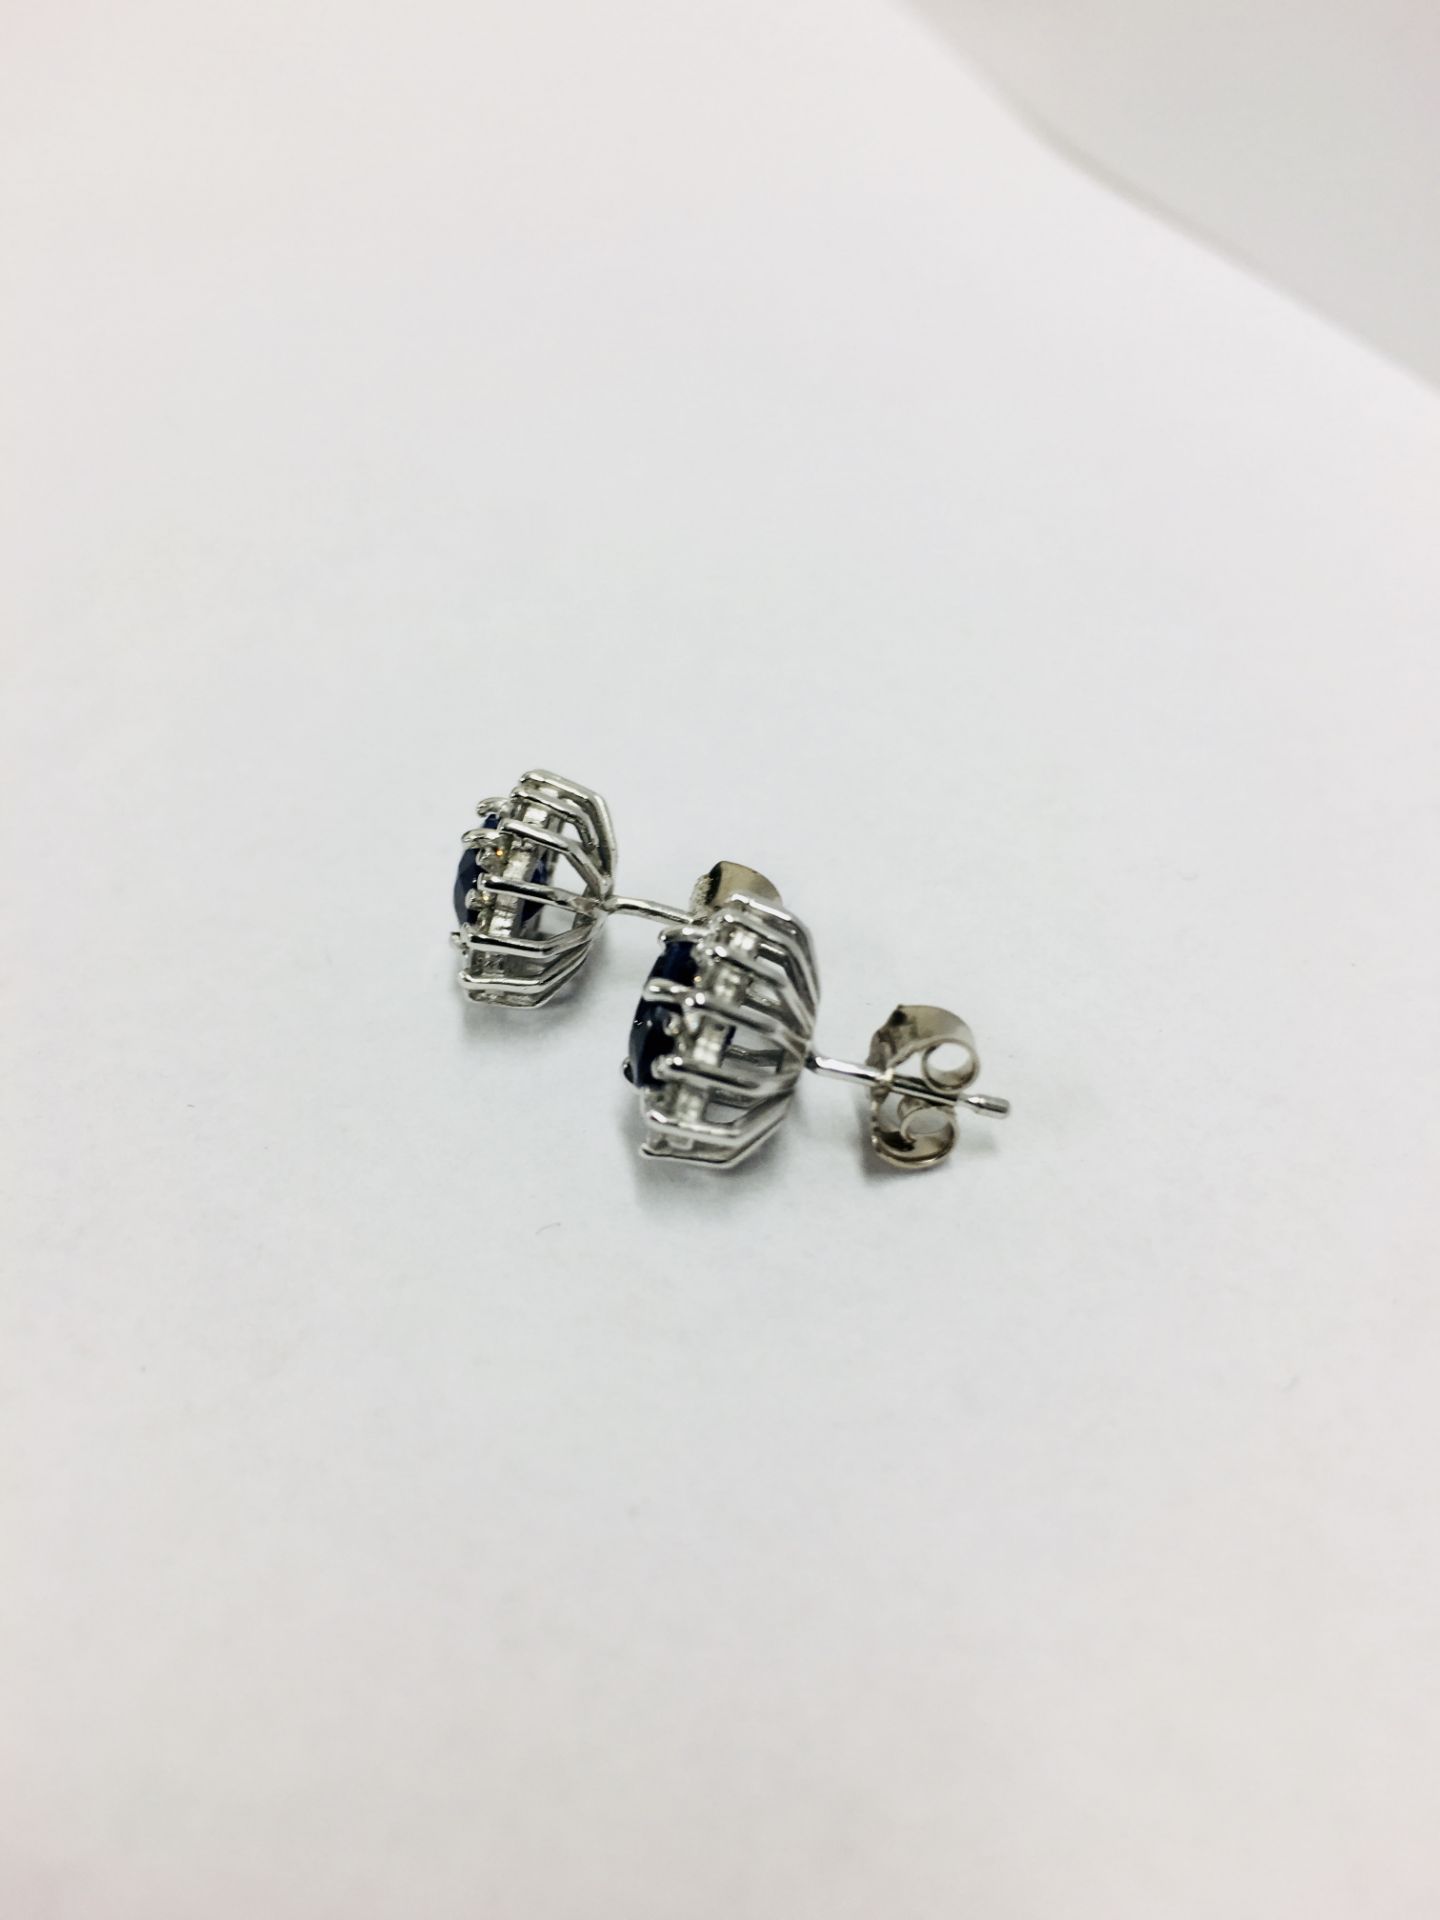 Sapphire diamond Earrings ,1.50ct Sapphire natural (6mmx4mm each),0.36ct diamonds ,9ct white gold - Image 2 of 5